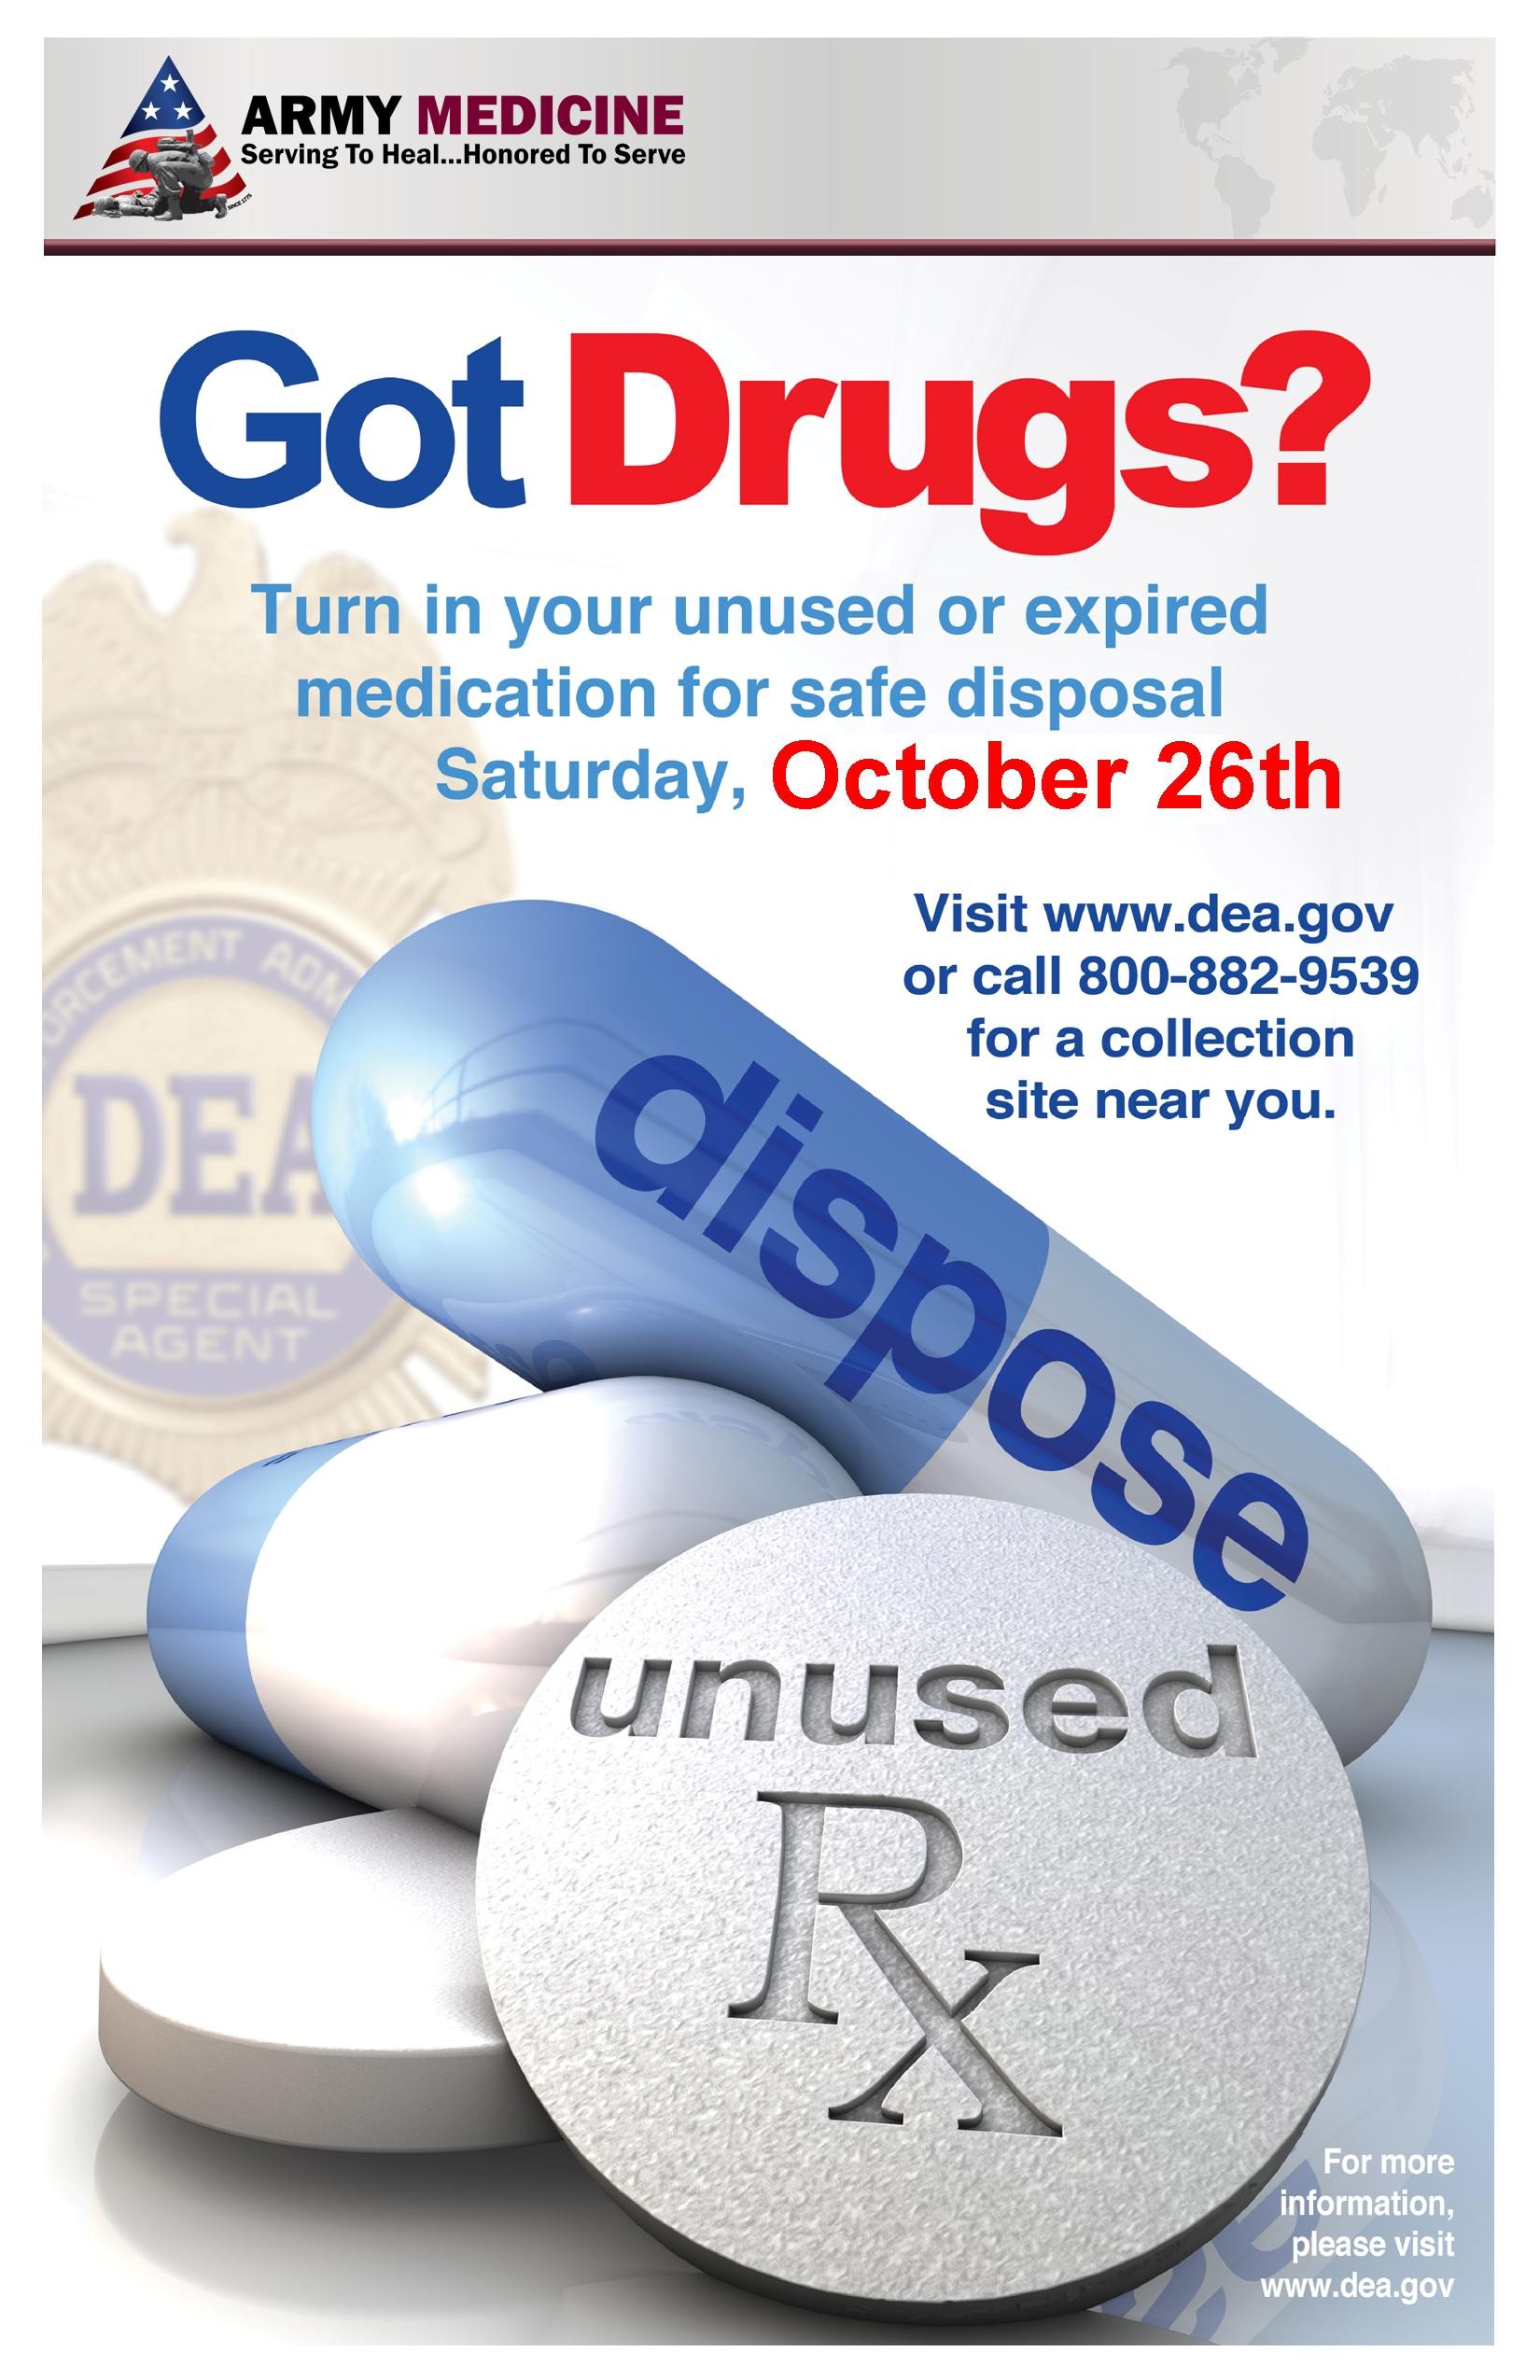 Army installations partner with DEA for National Prescription Drug Take